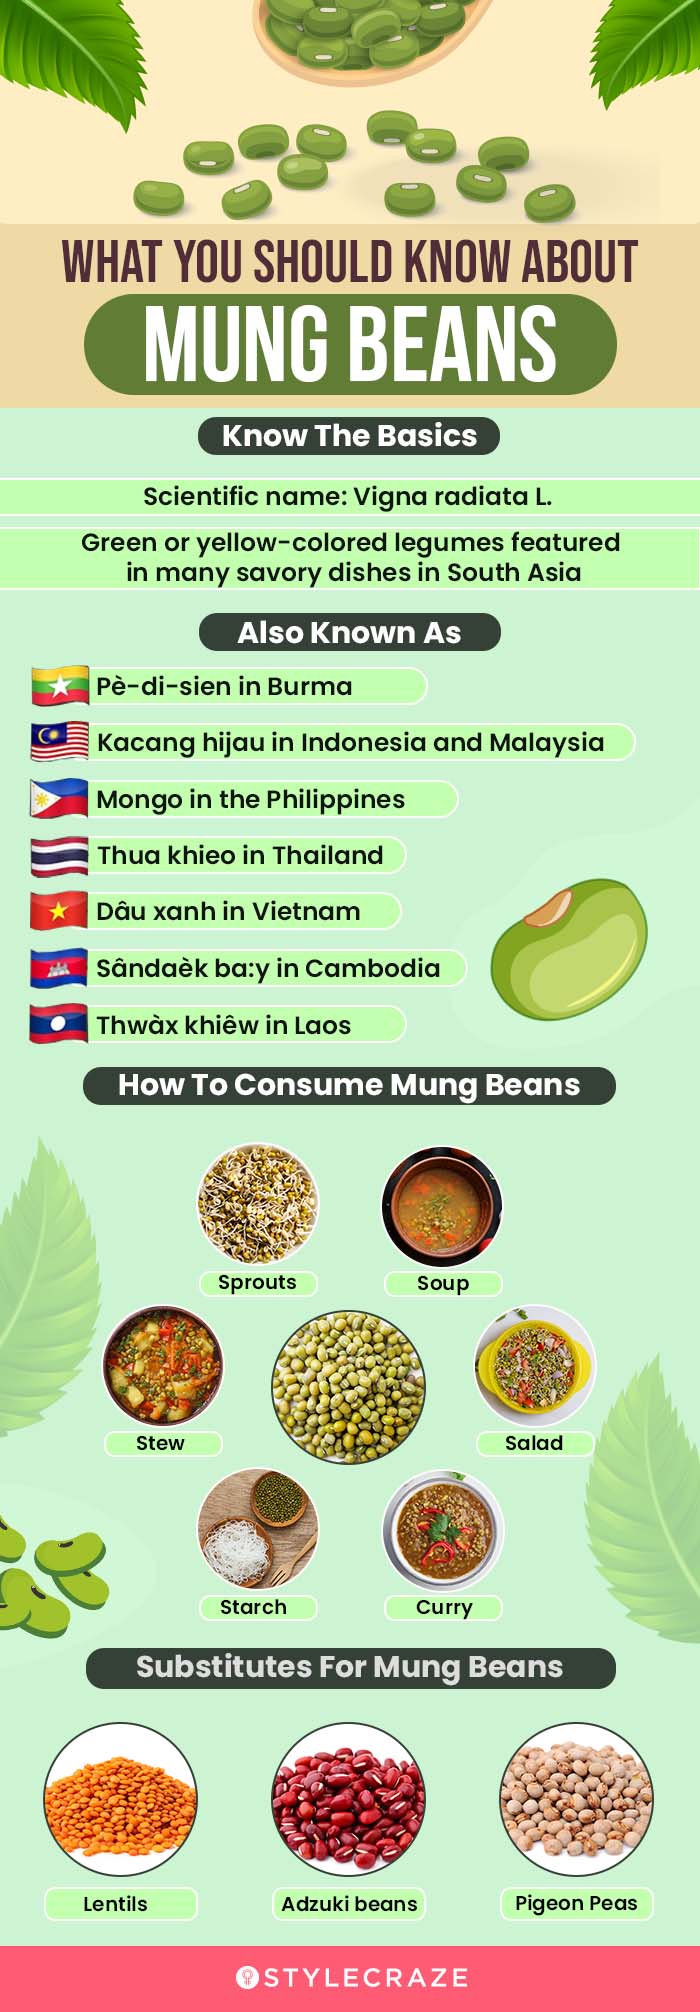 what you should know about mung beans (infographic)